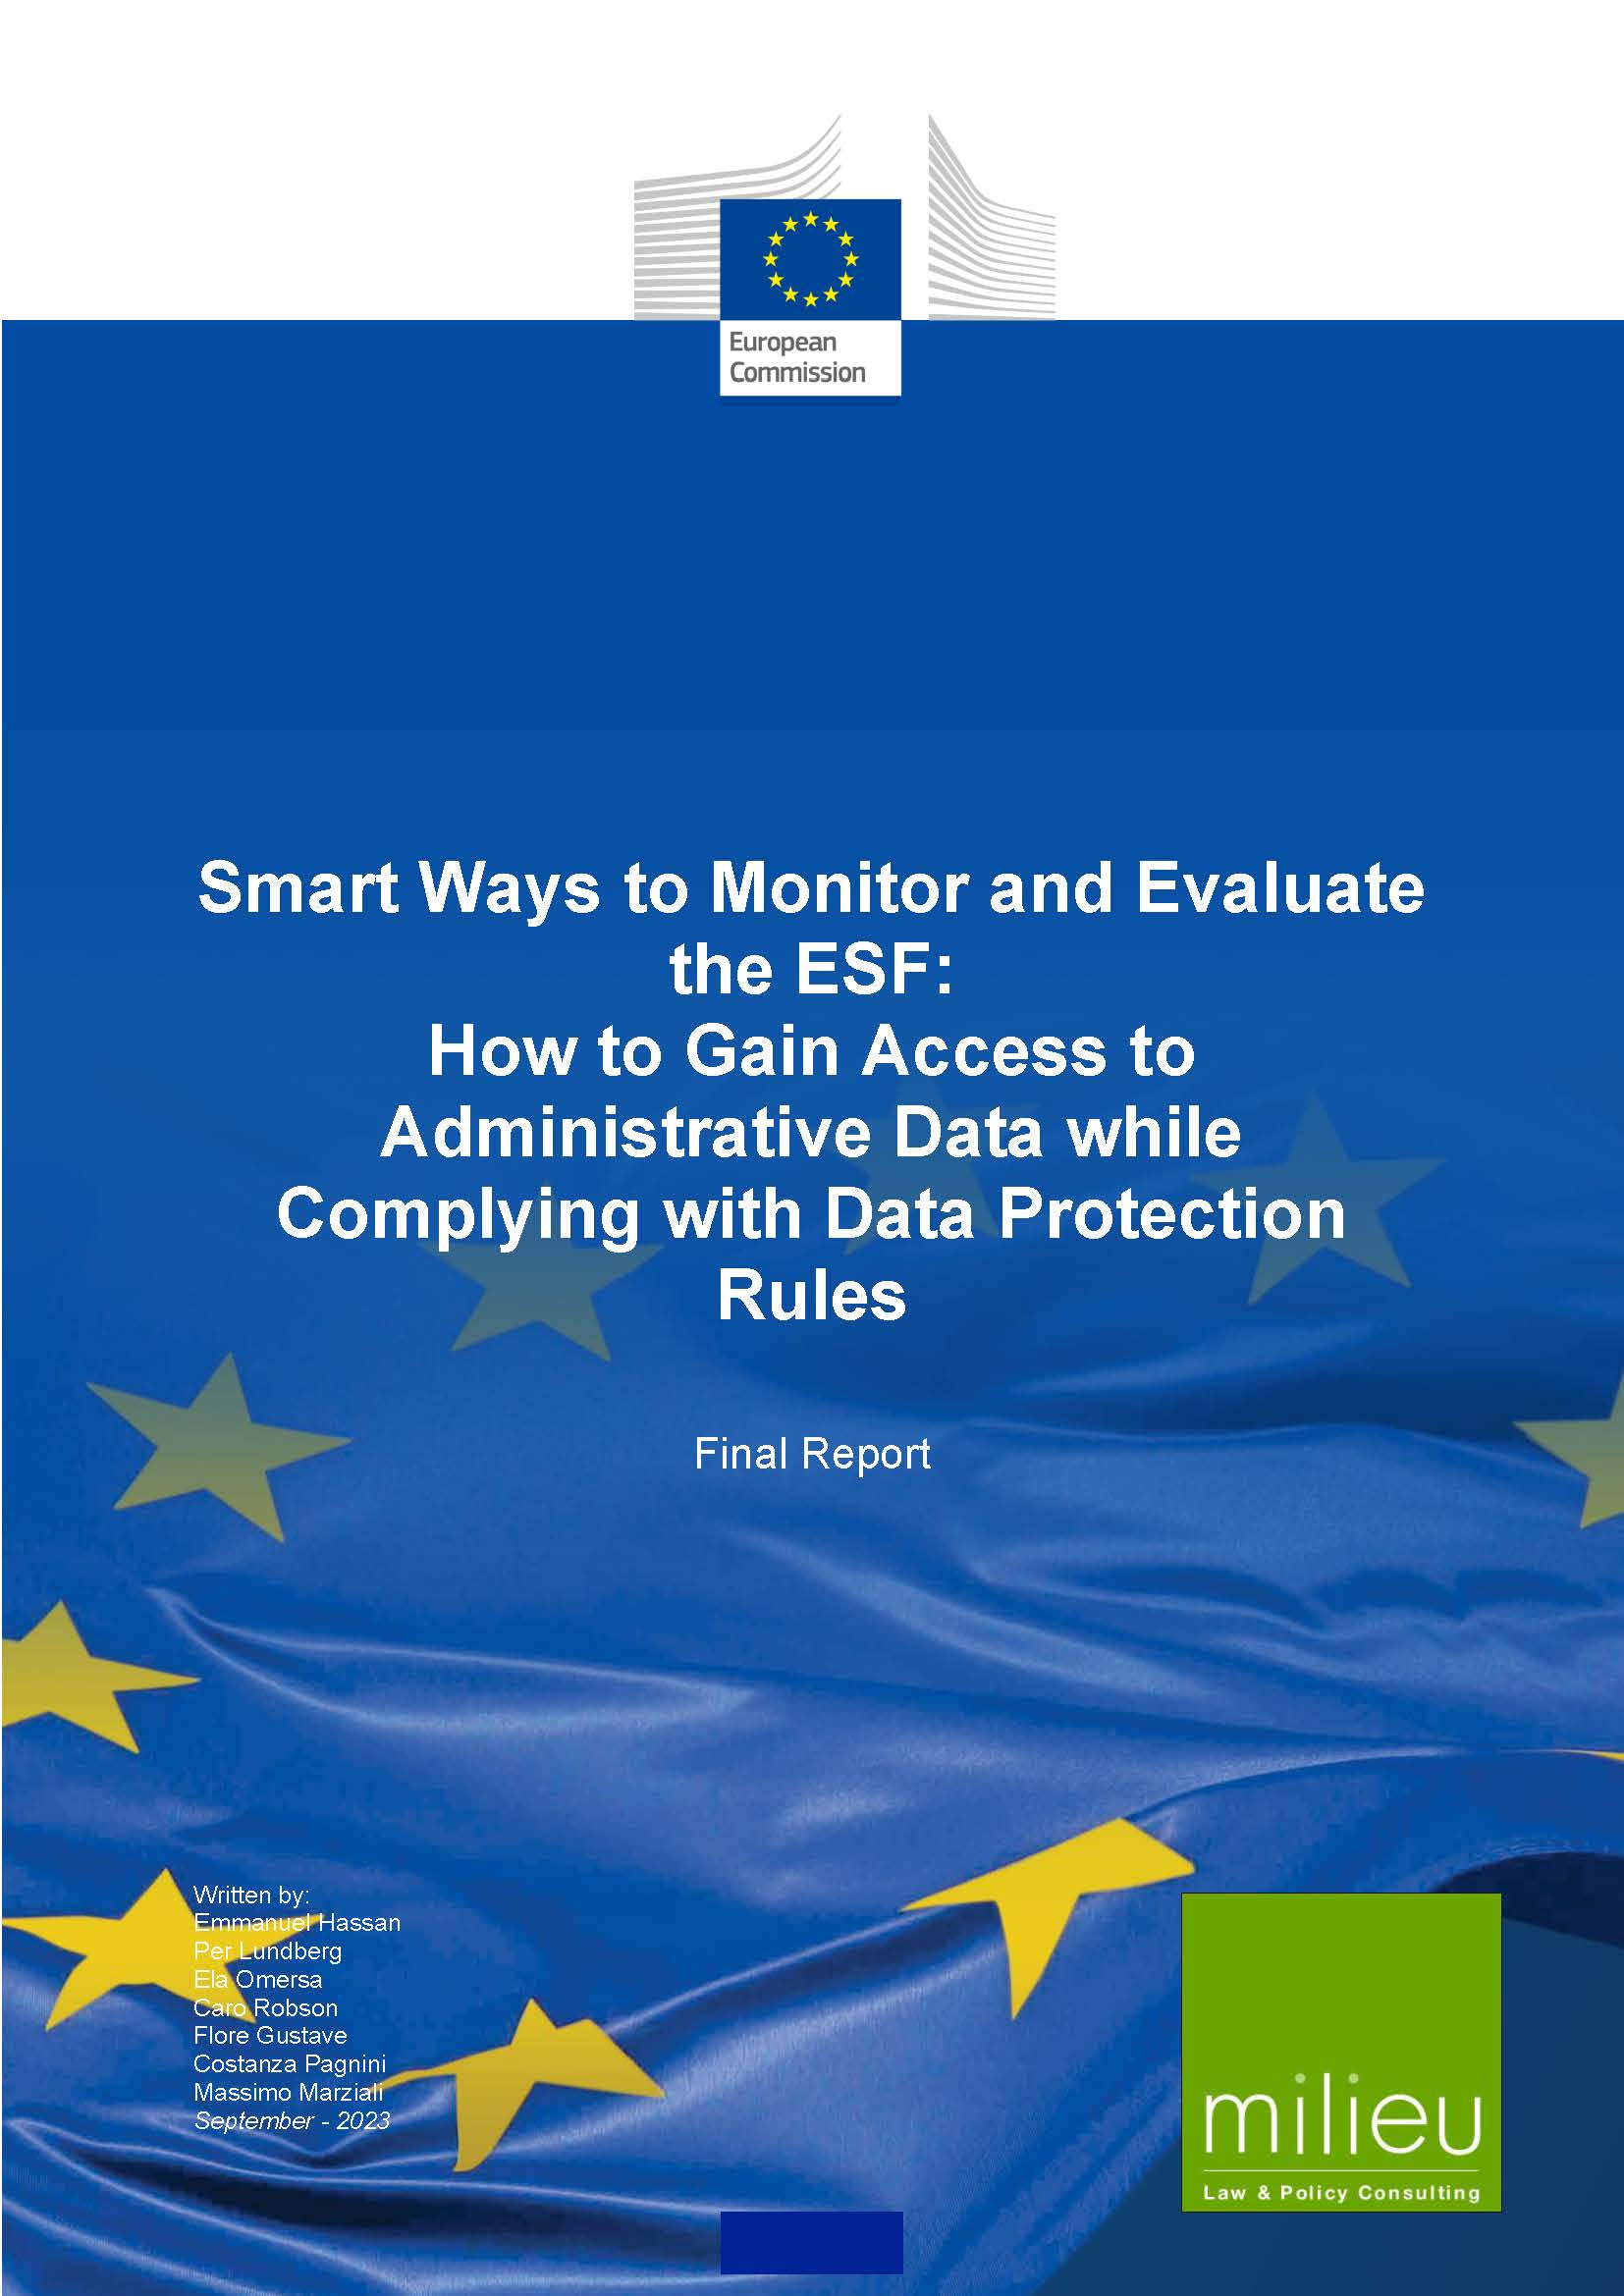 Smart Ways to Monitor and Evaluate the ESF: How to Gain Access to Administrative Data while Complying with Data Protection Rules